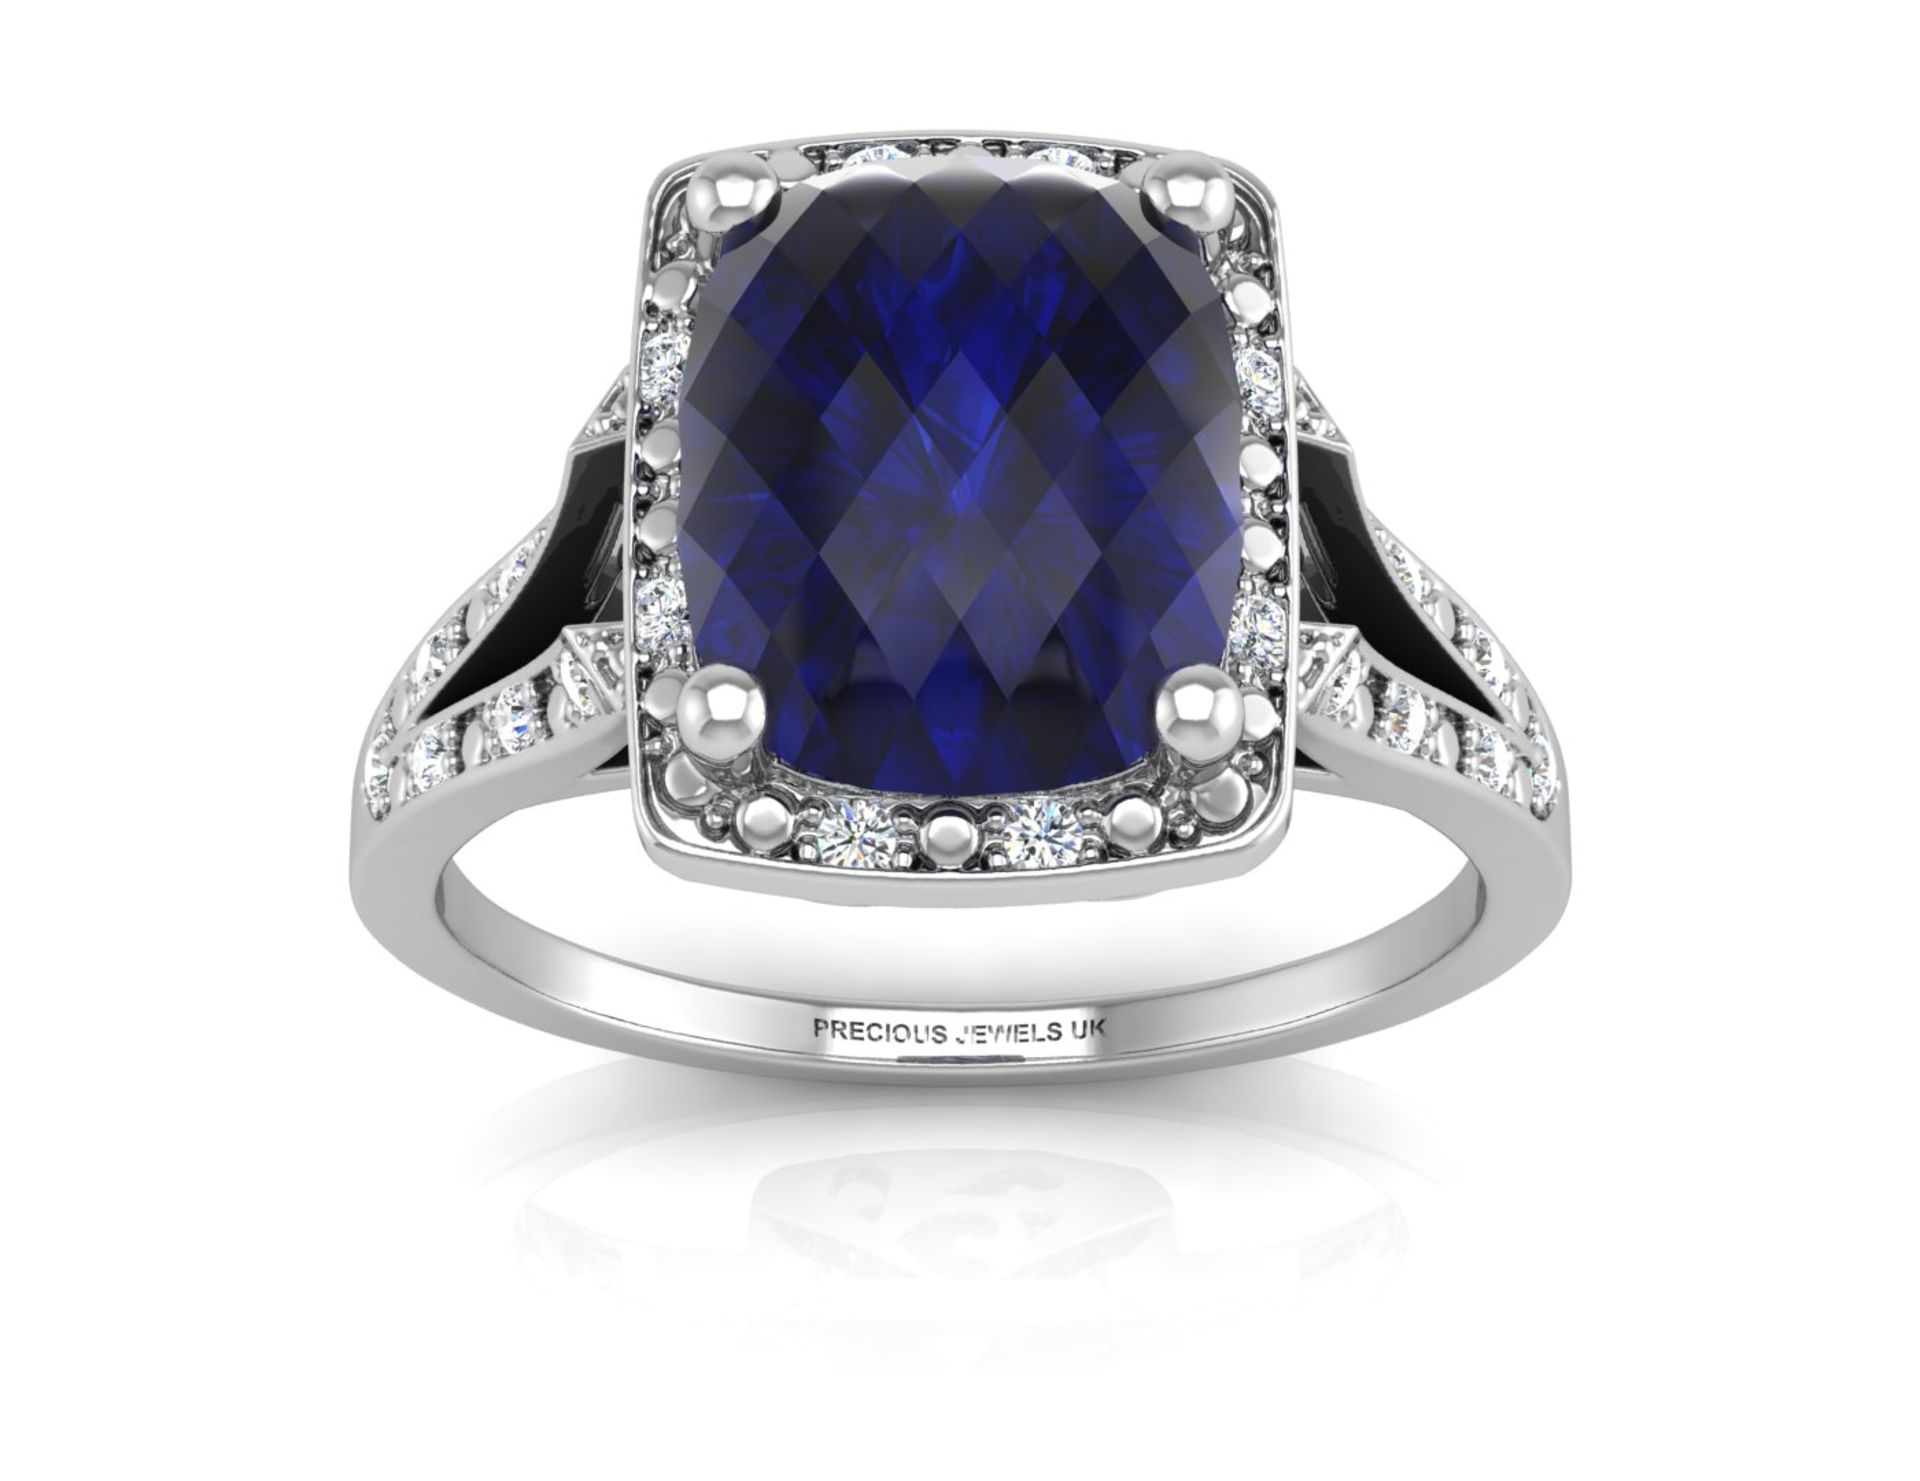 9ct White Gold Cushion Cluster Diamond And Created Ceylon Sapphire Ring 0.11 Carats - Image 3 of 5